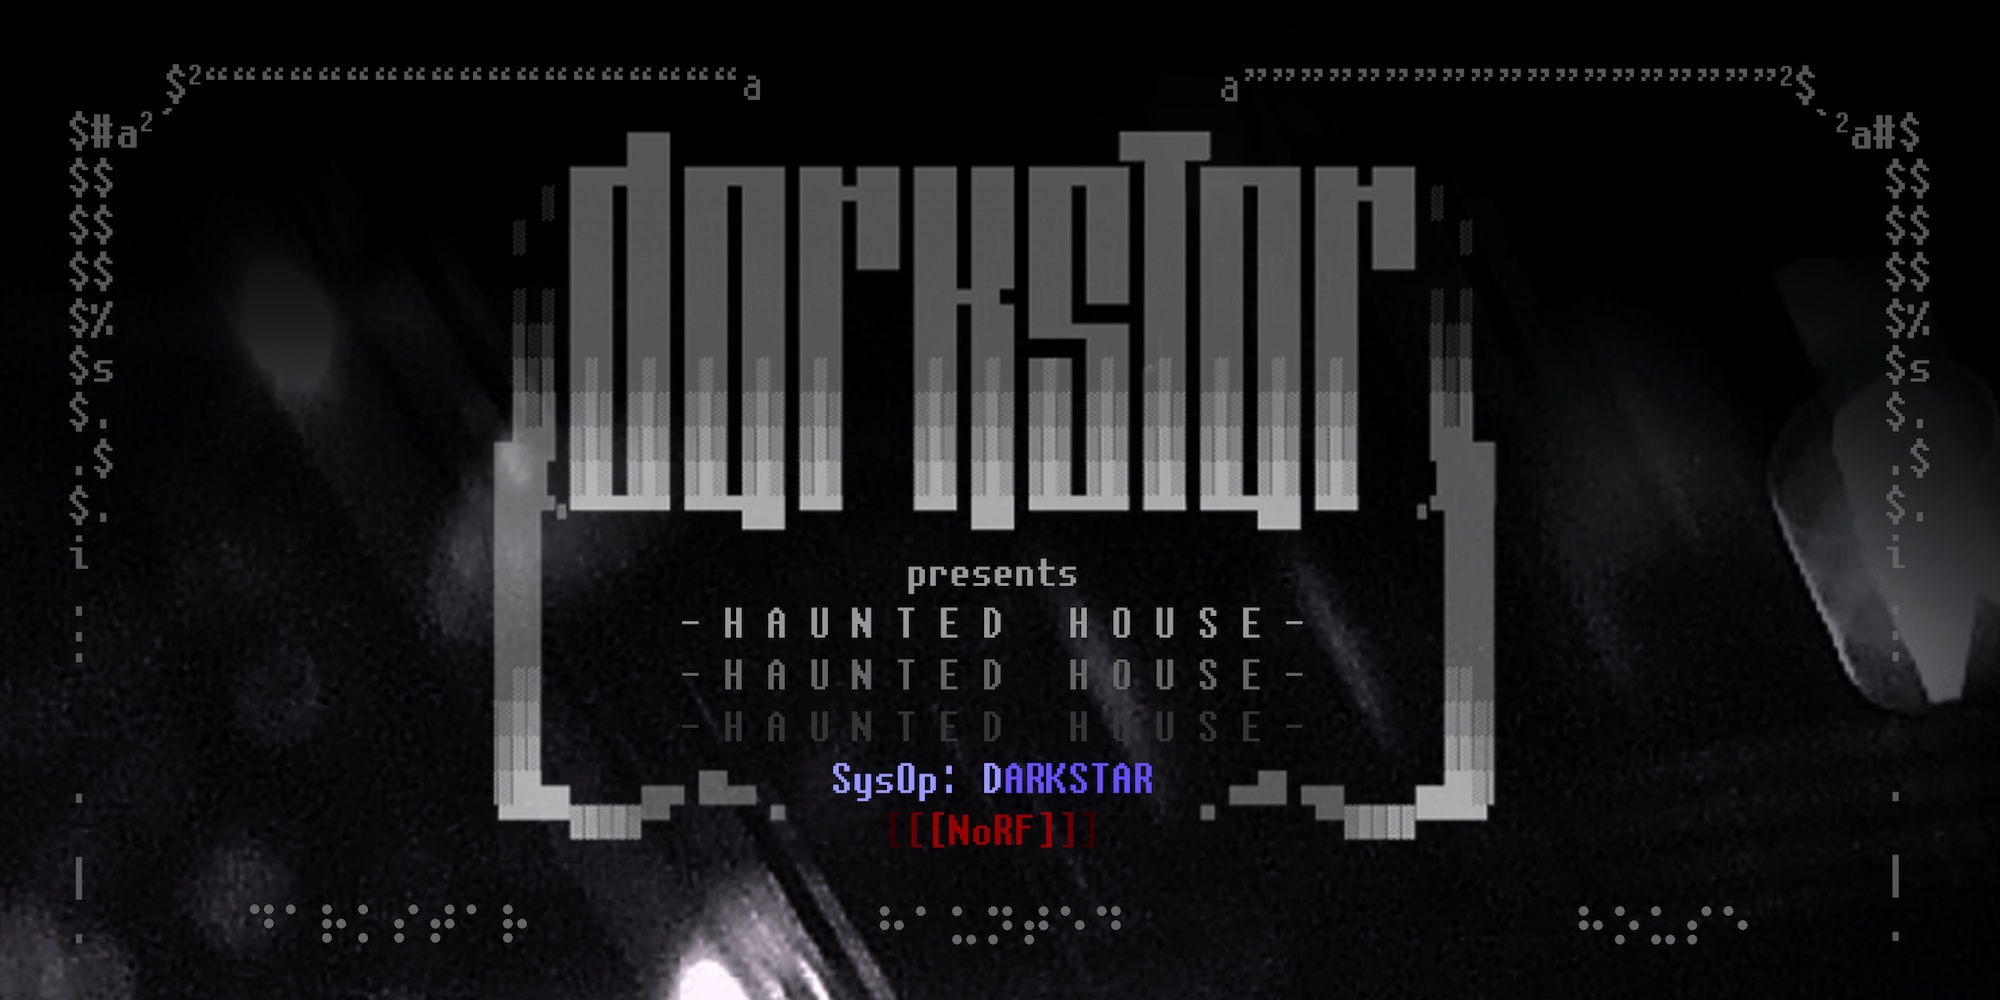 Mer information om "Spitfire Audio announces availability of Darkstar - Haunted House"